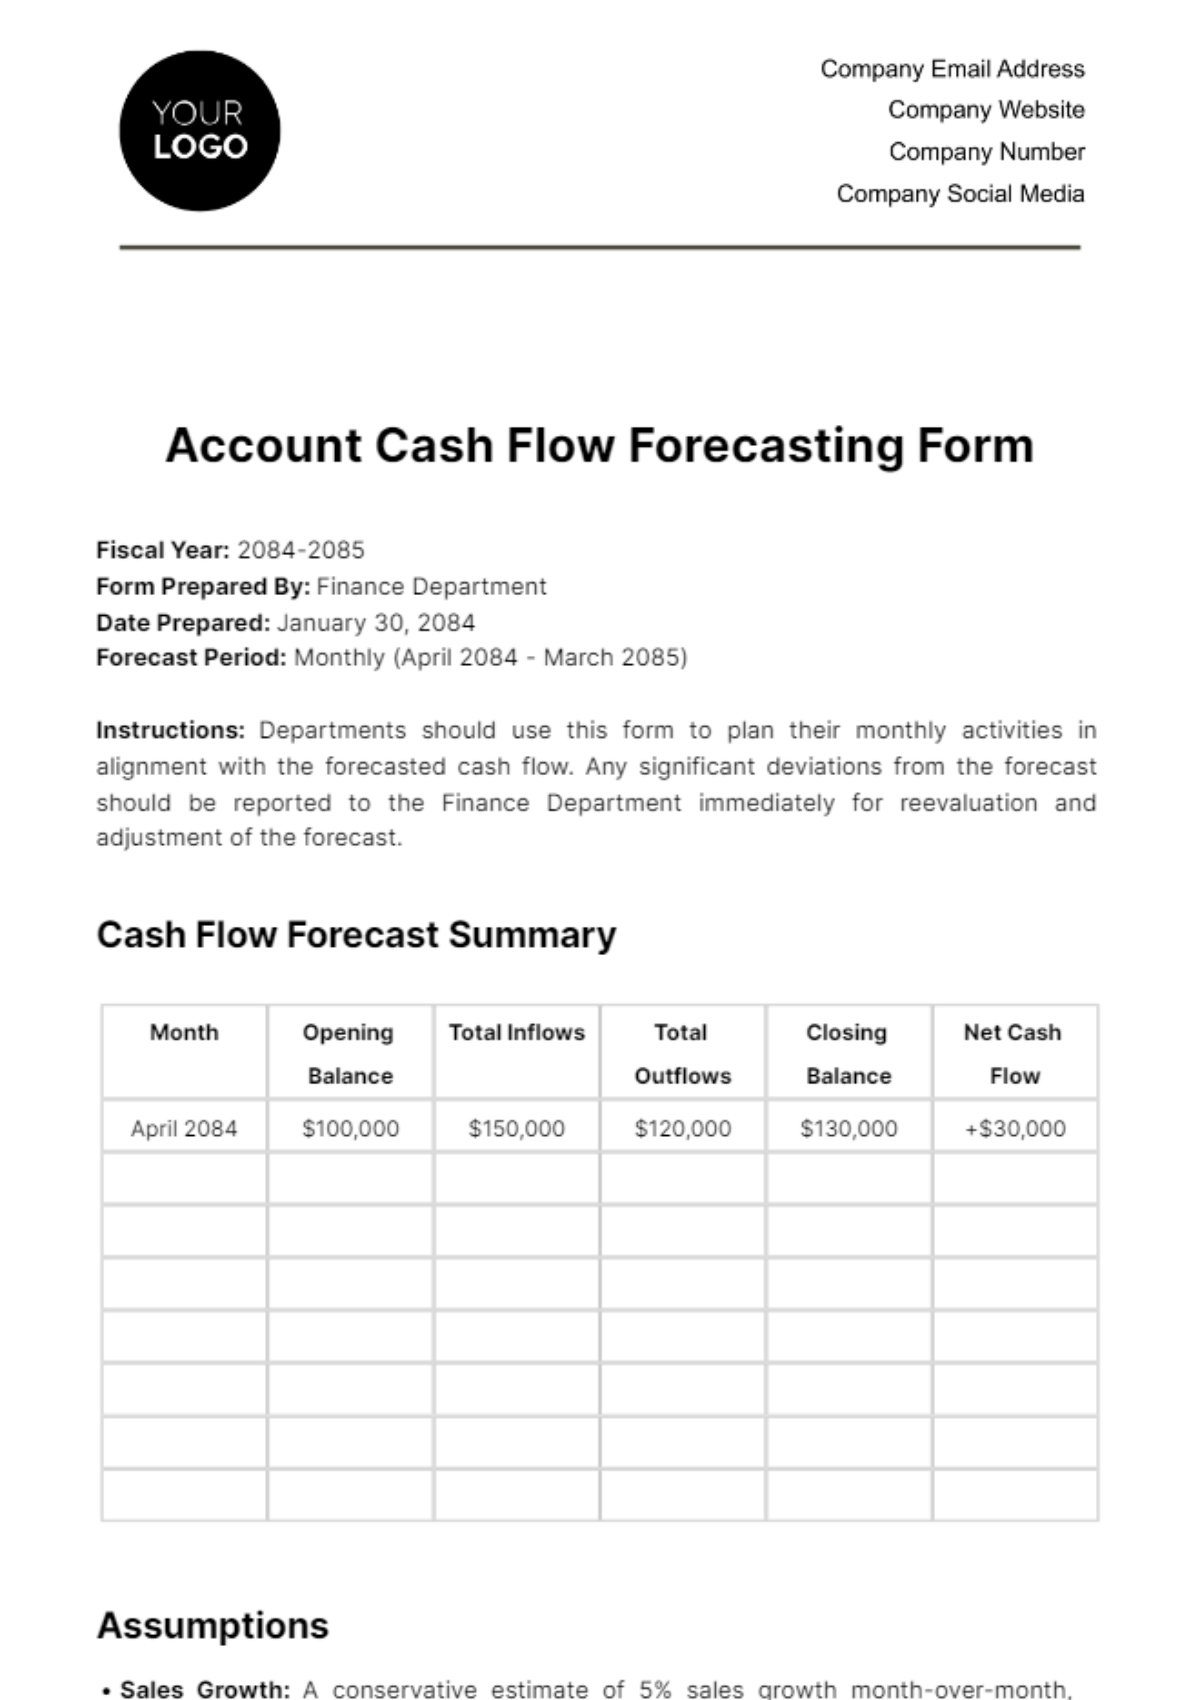 Free Account Cash Flow Forecasting Form Template